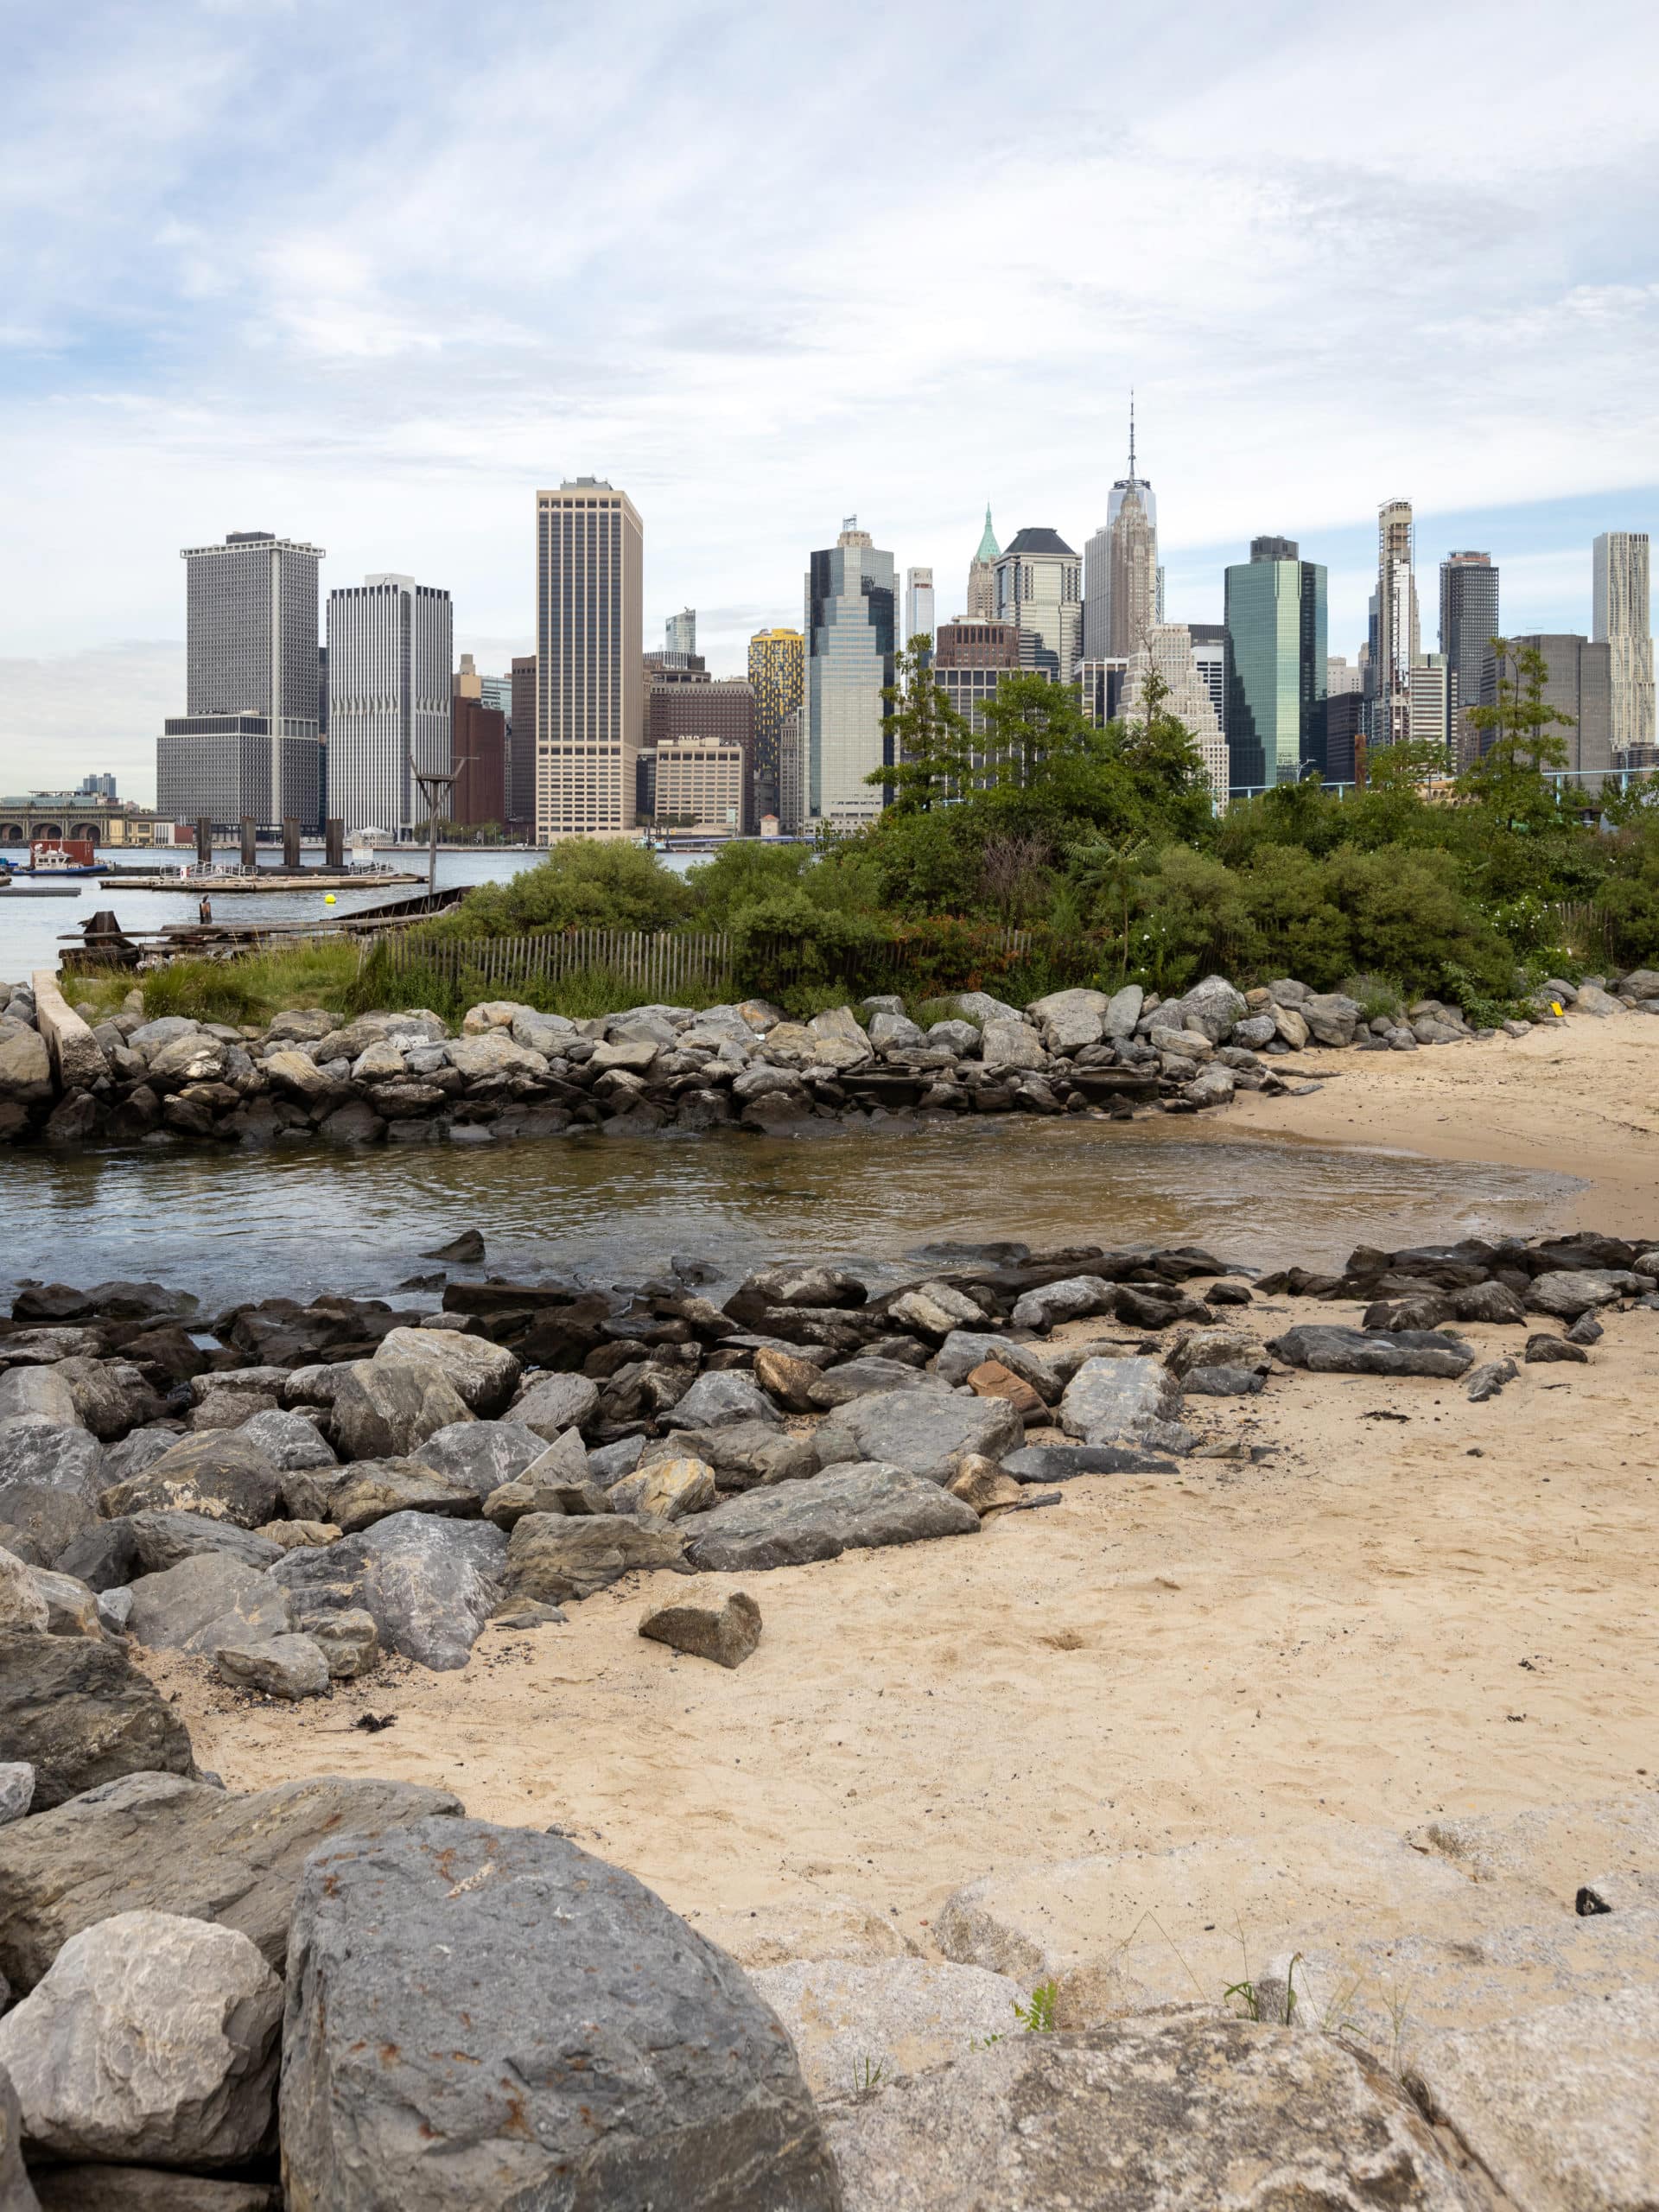 Rocks and trees along the Pier 4 Beach with lower Manhattan in the background.